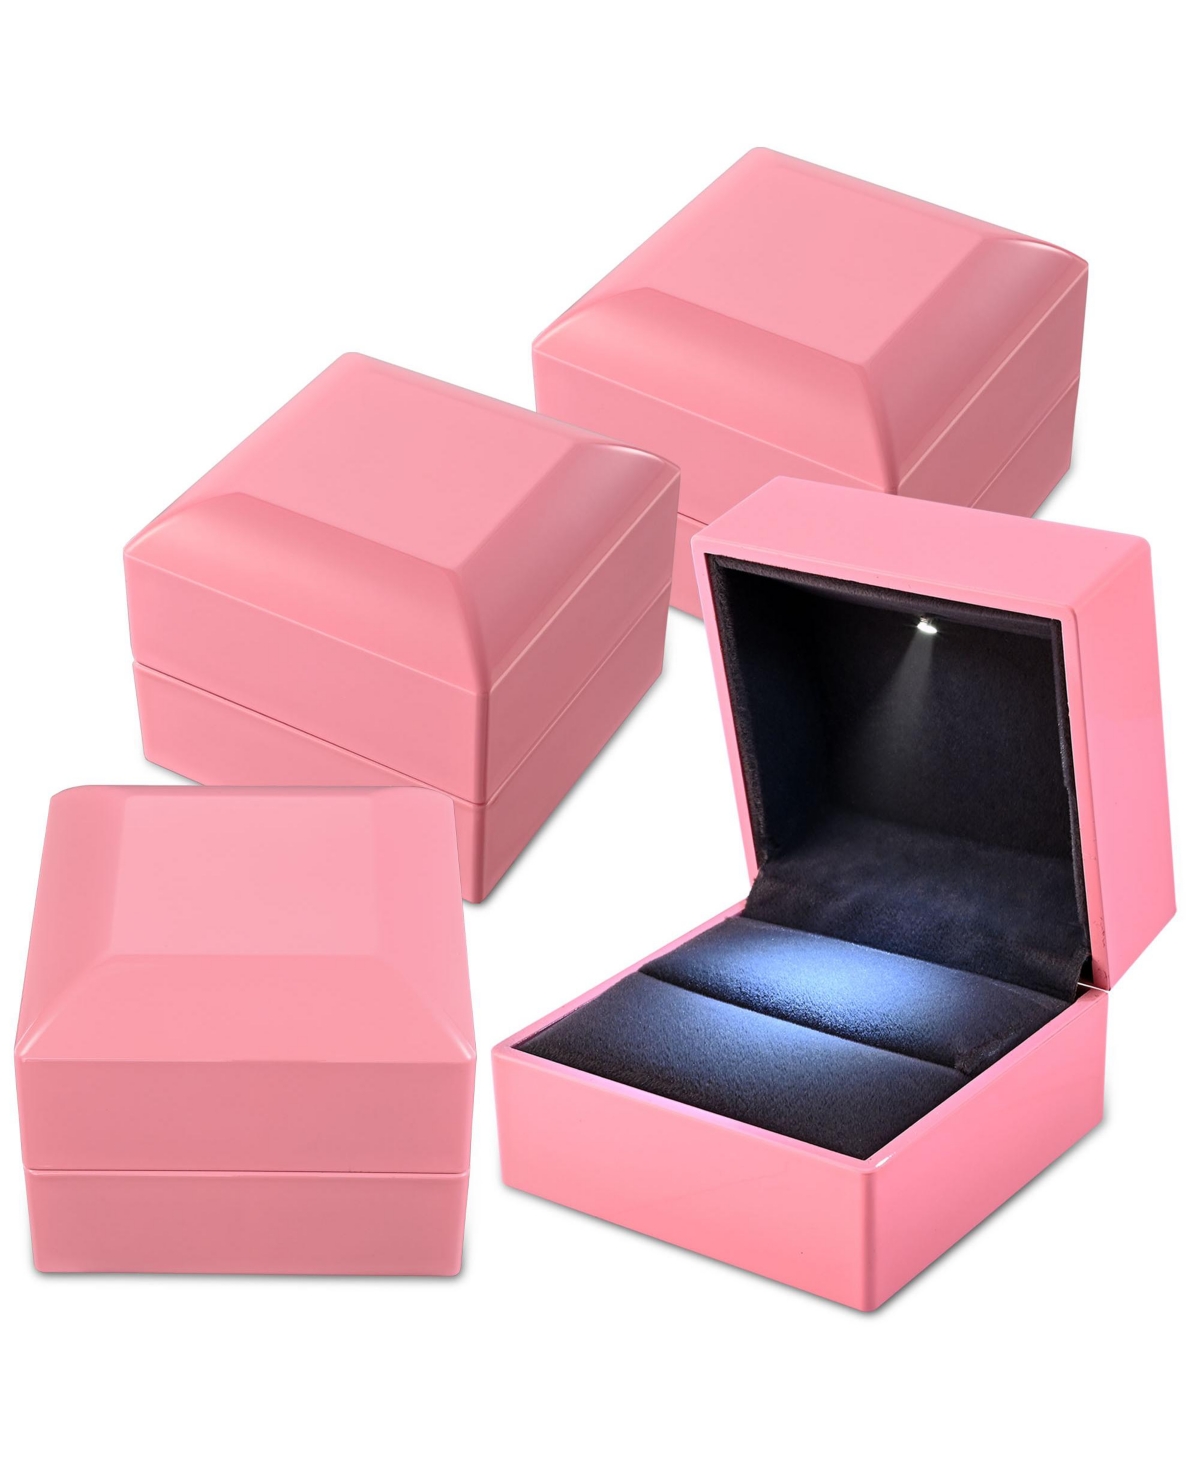 Led Ring Box Jewelry Wedding Engagement Proposal Lighted Pin Storage Case 4 Pack - Pink